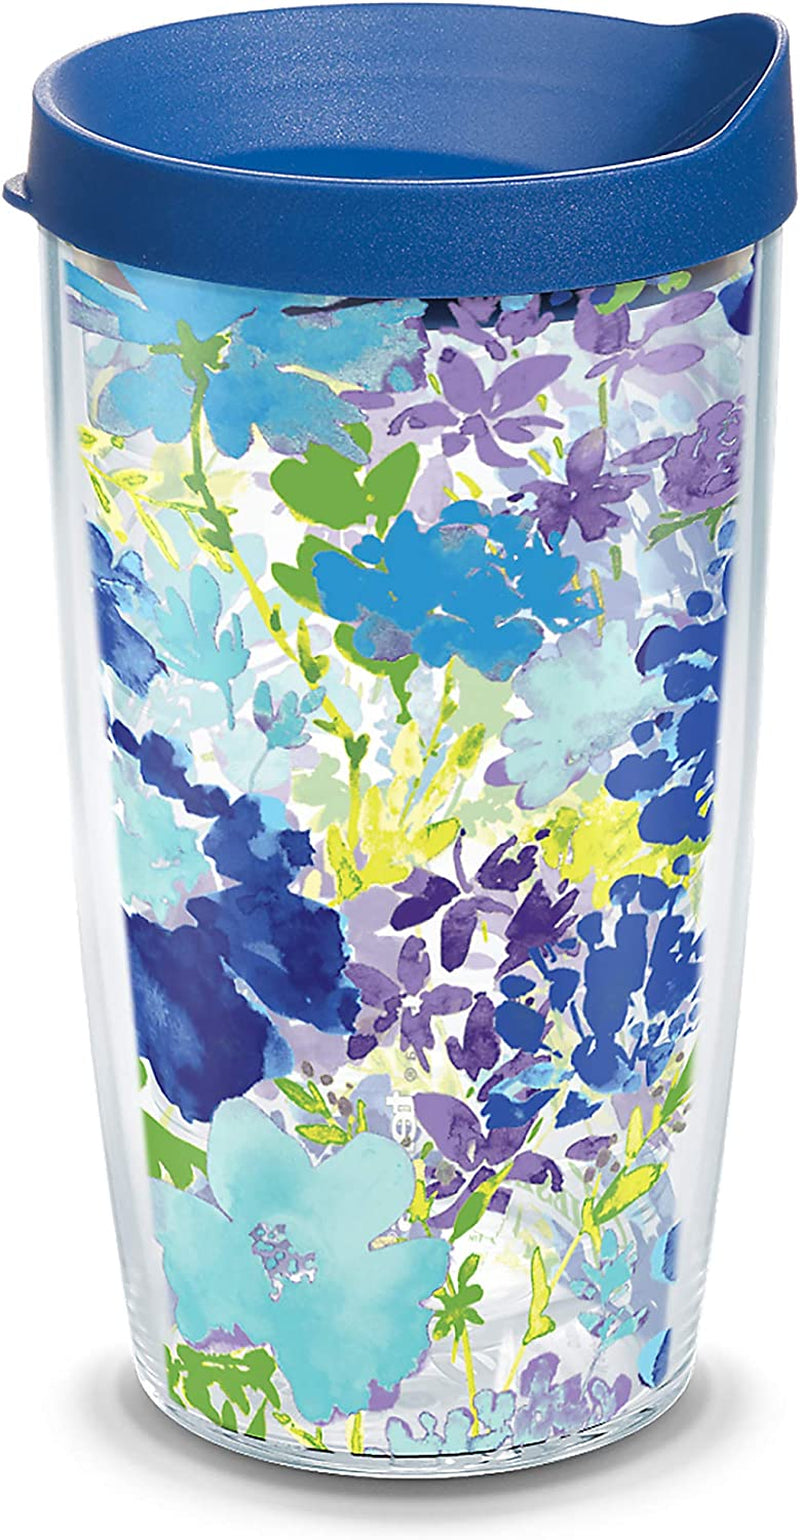 Tervis Made in USA Double Walled Fiesta Insulated Tumbler Cup Keeps Drinks Cold & Hot, 16Oz Mug - Purple Lid, Purple Floral Home & Garden > Kitchen & Dining > Tableware > Drinkware Tervis Classic - Blue Lid 16oz 